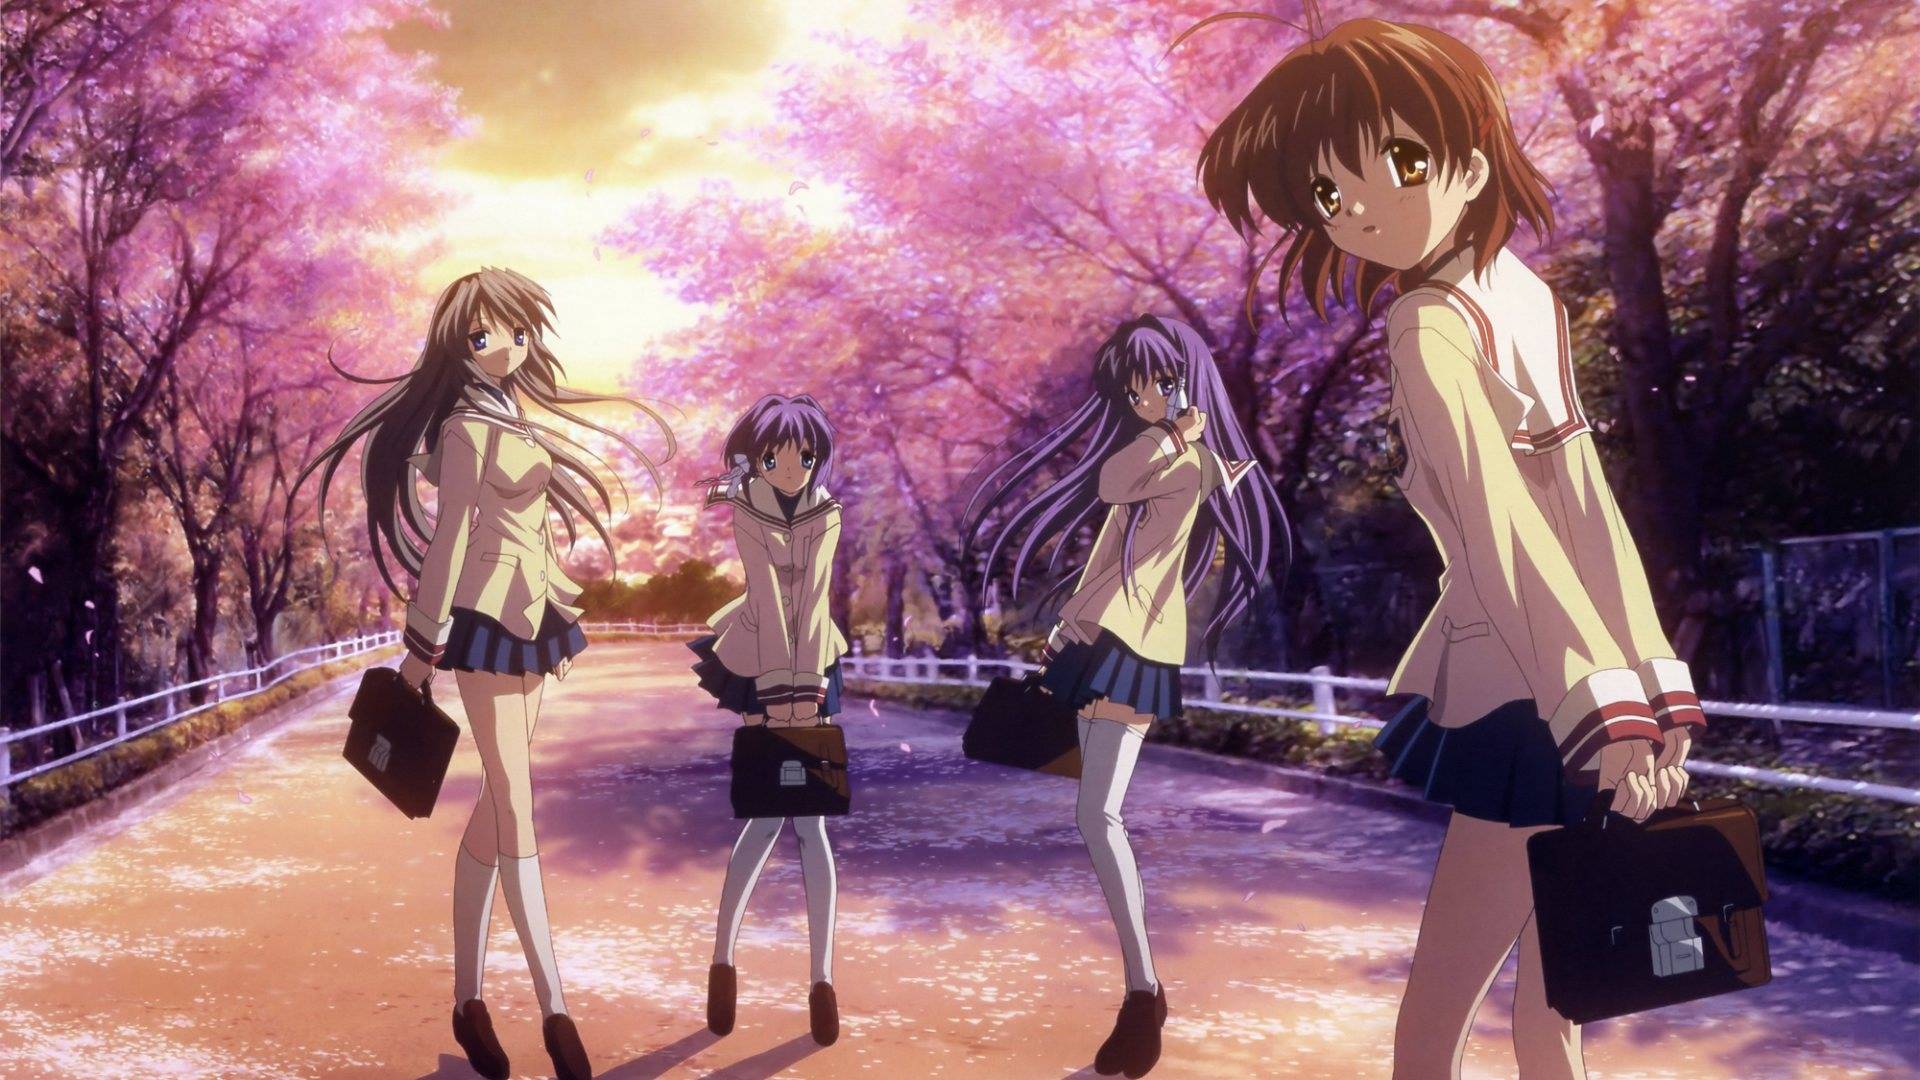 Free Download Clannad Clannad Wallpaper 19x1080 For Your Desktop Mobile Tablet Explore 74 Clannad Wallpapers Dango Wallpaper Clannad Wallpaper Iphone